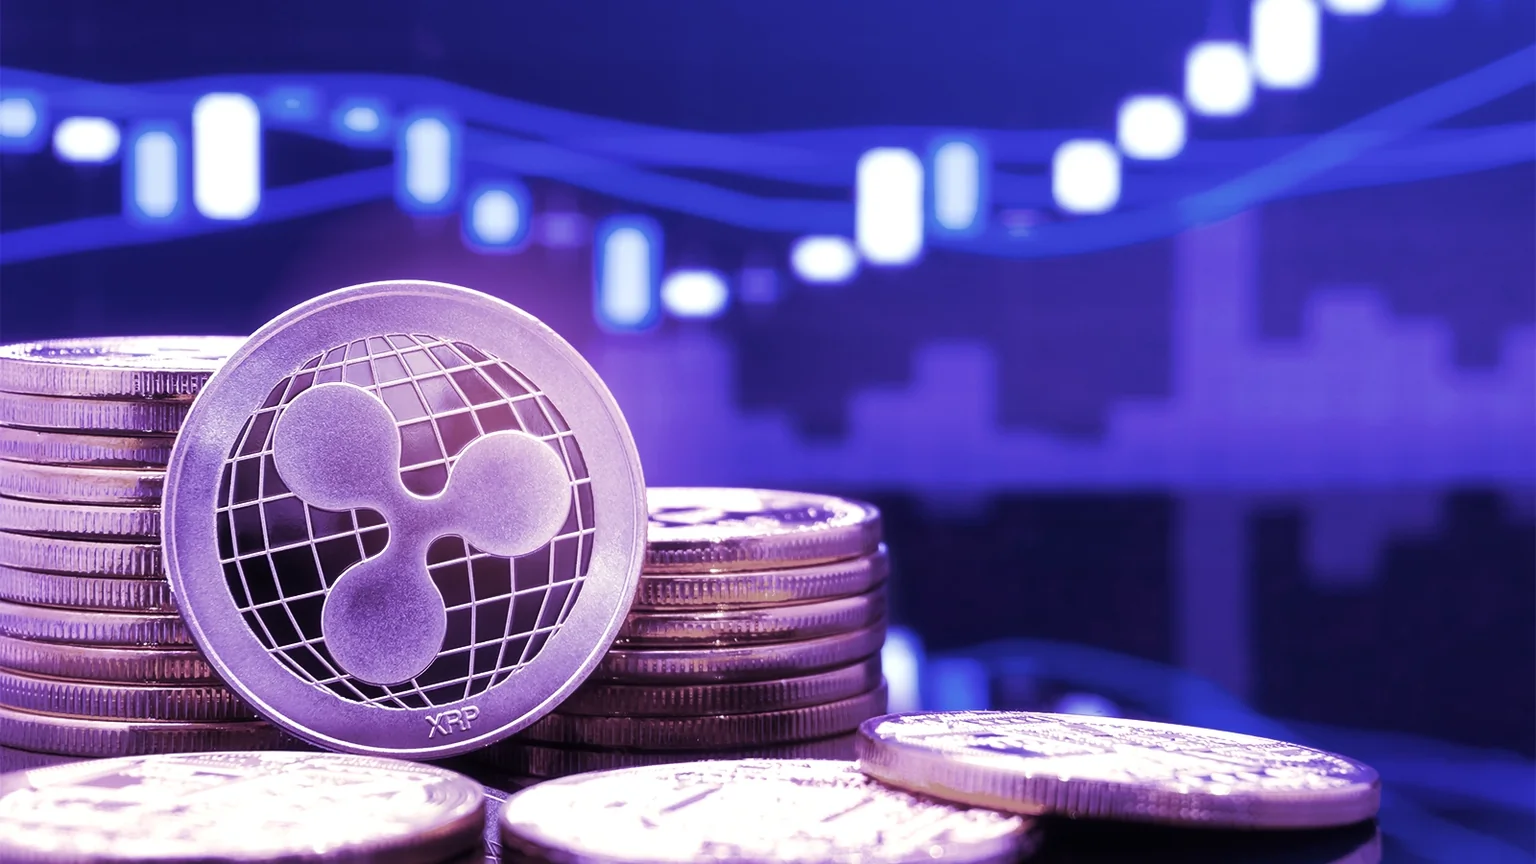 XRP is one of the most popular cryptocurrencies on the market. Image: Shutterstock